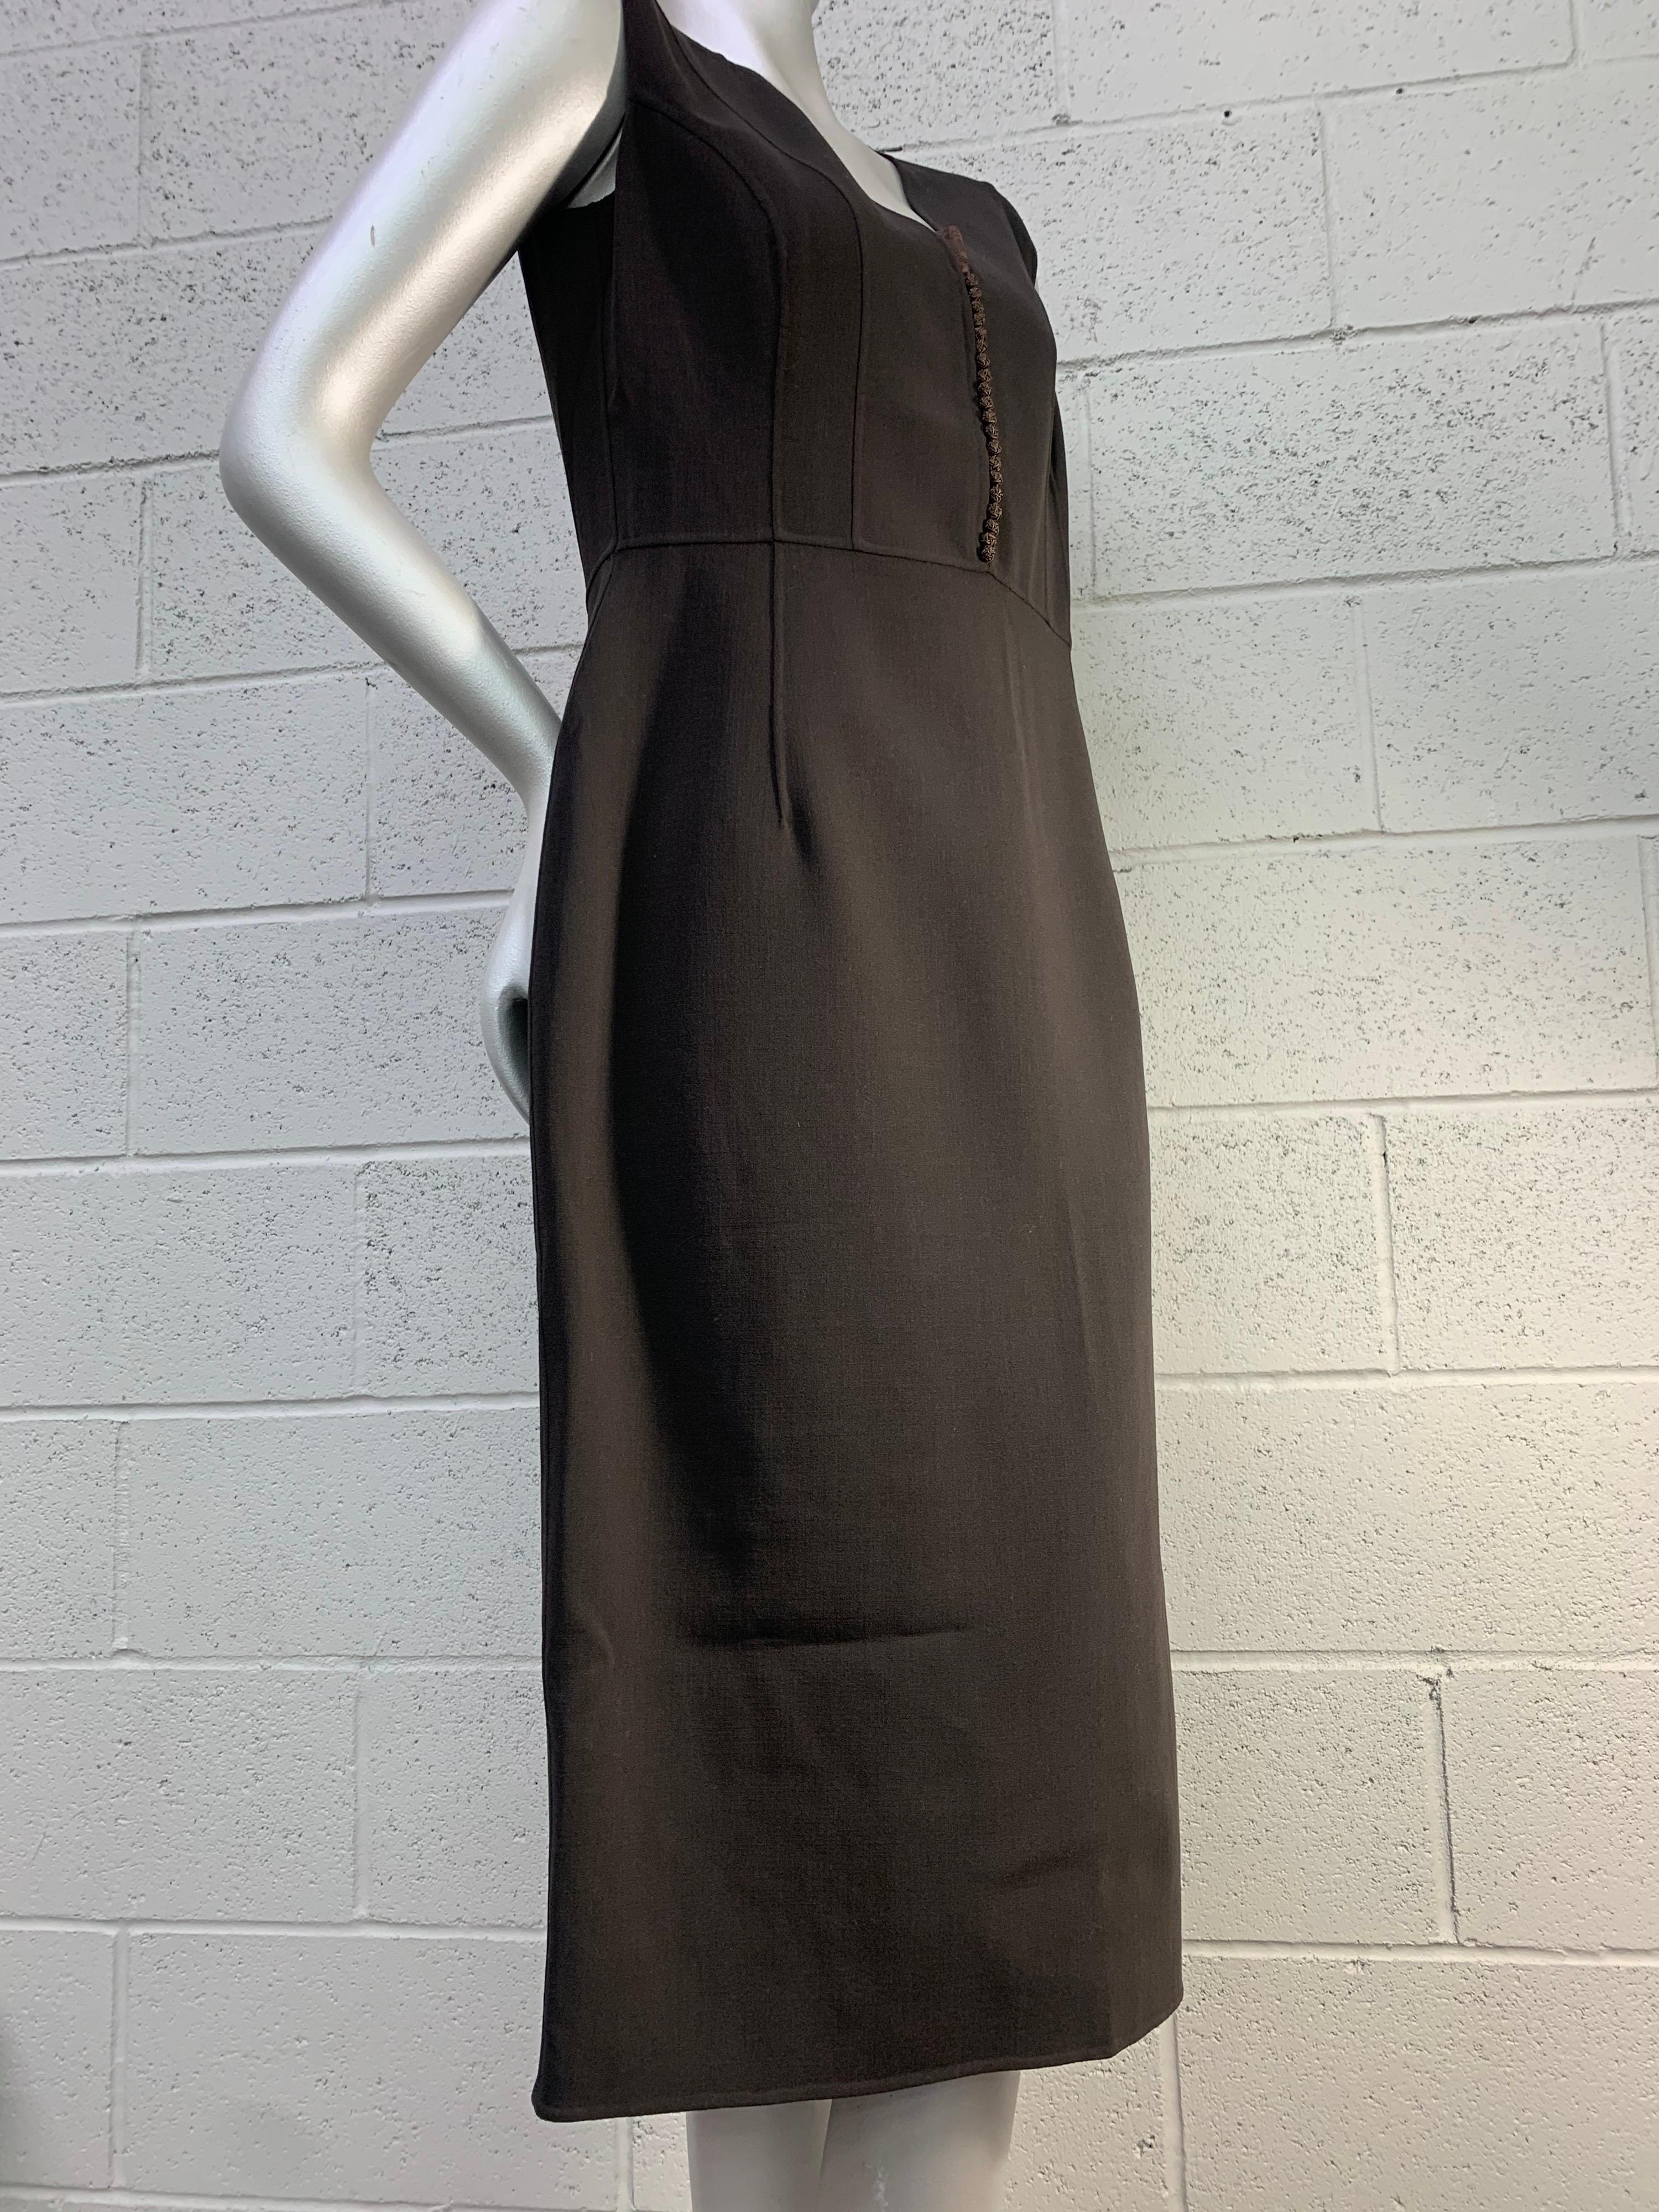 2000 Celine chocolate brown wool and spandex minimalist sleeveless cocktail dress with center front lace insert and cord-knot buttons.  Size EU 44. 